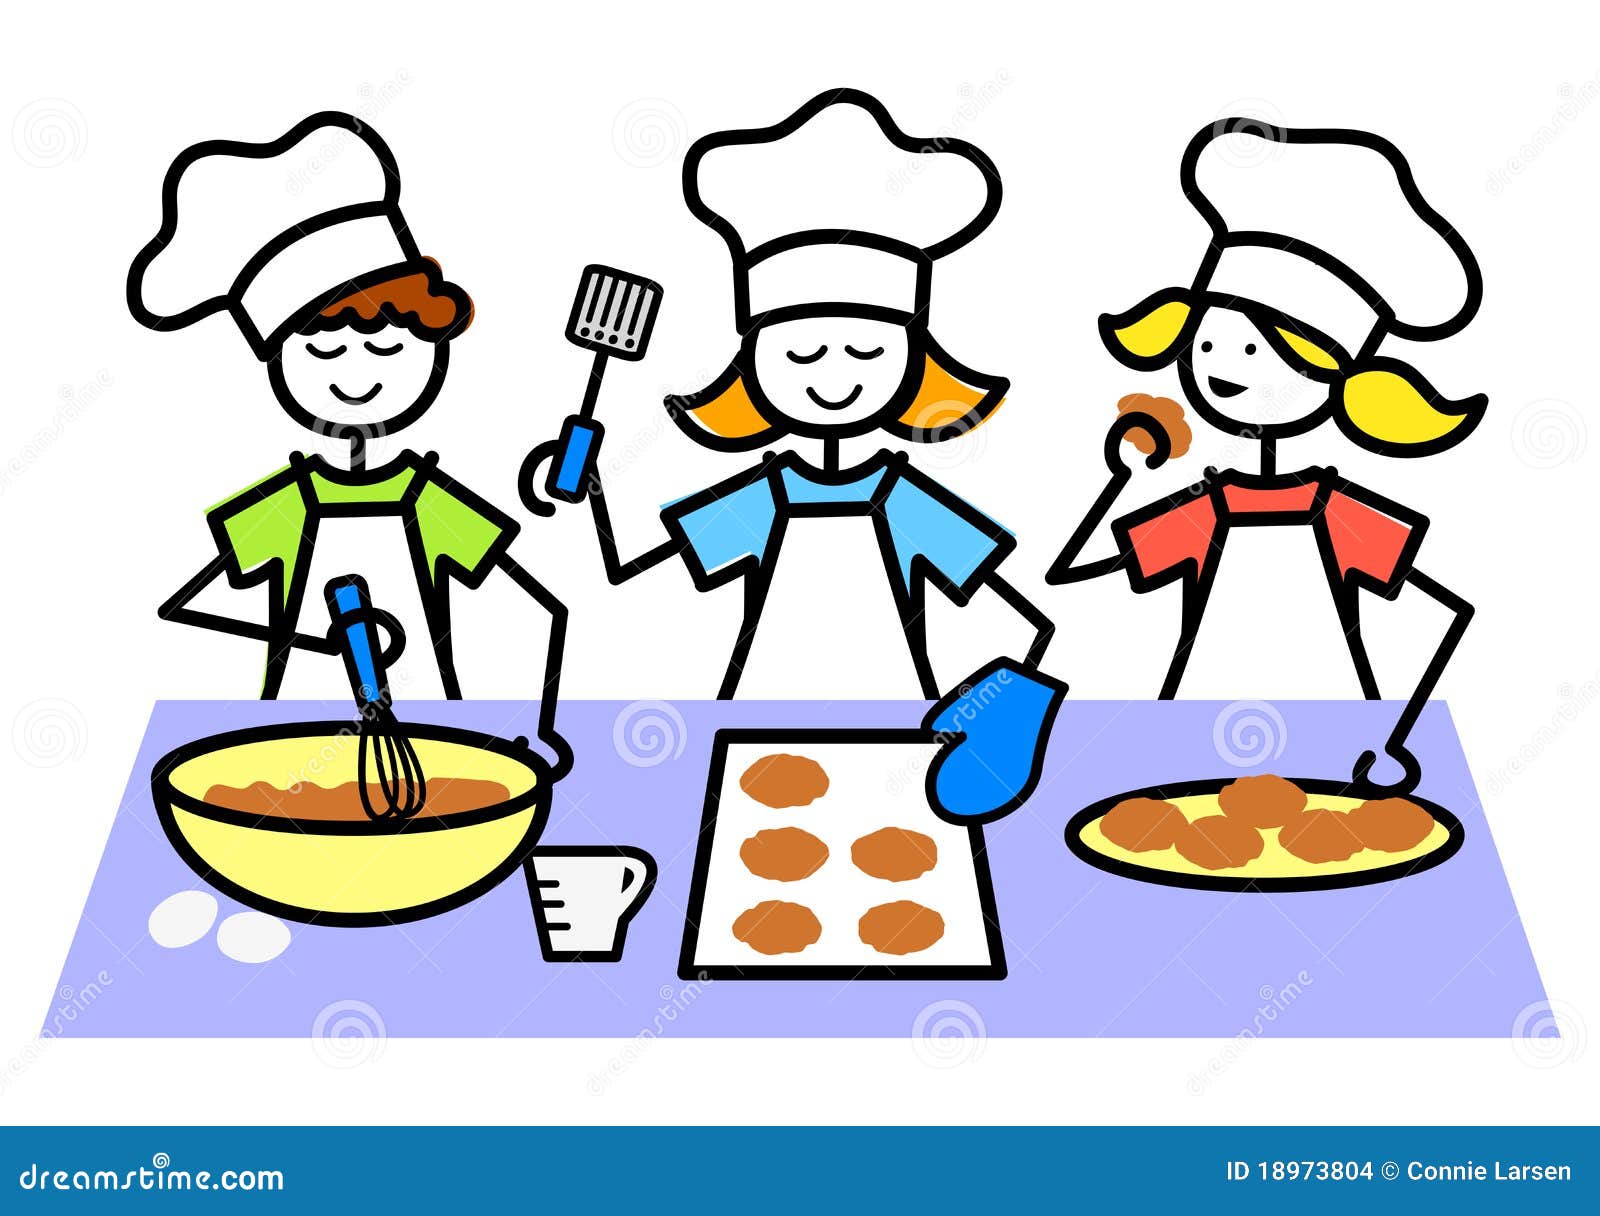 family cooking clipart - photo #31